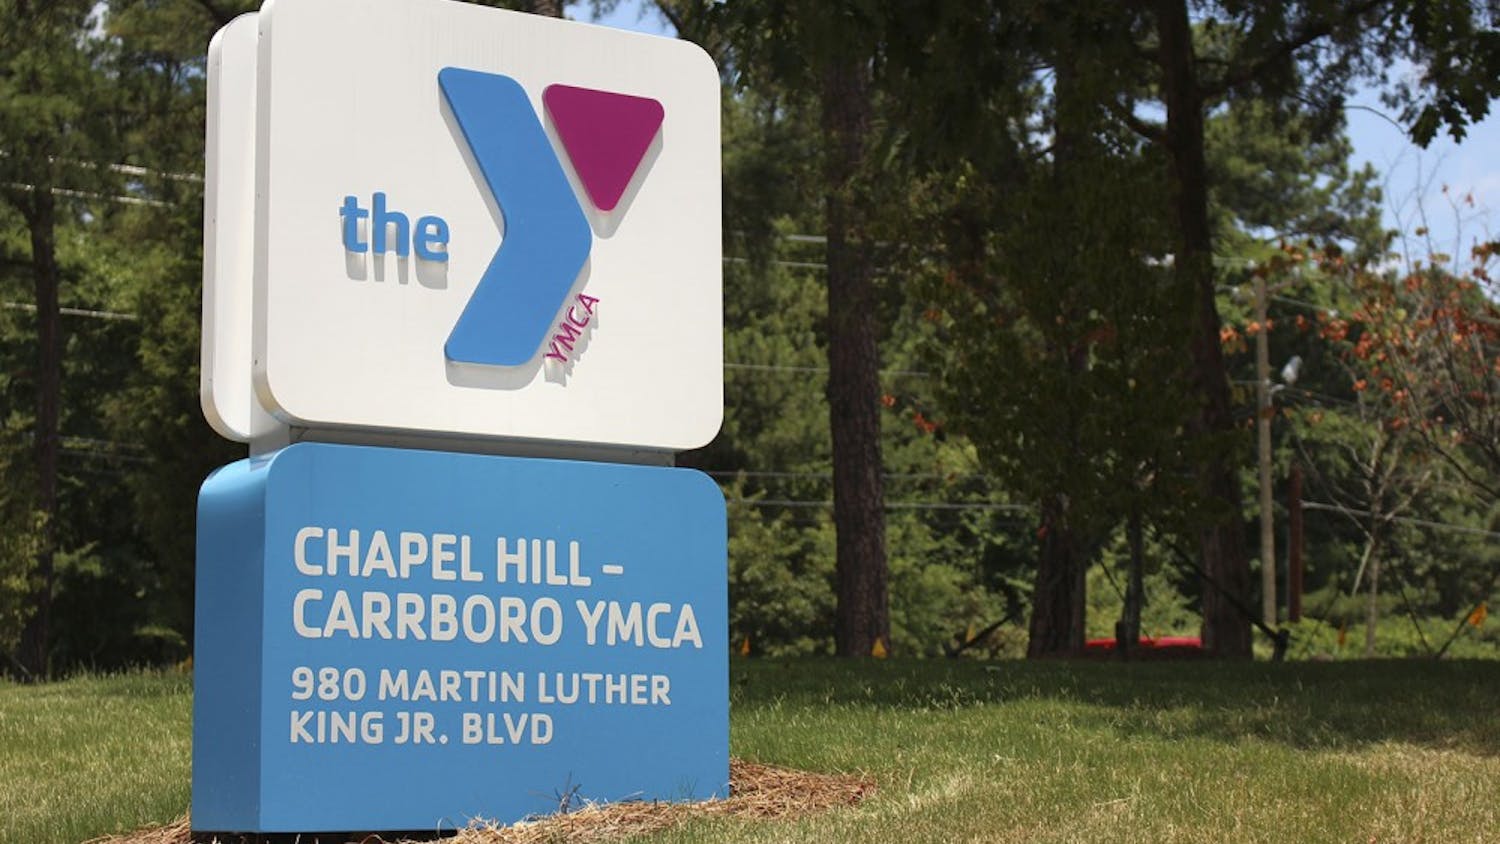 The local Chapel Hill-Carrboro YMCA will merge witht the Triangle location after much debate.